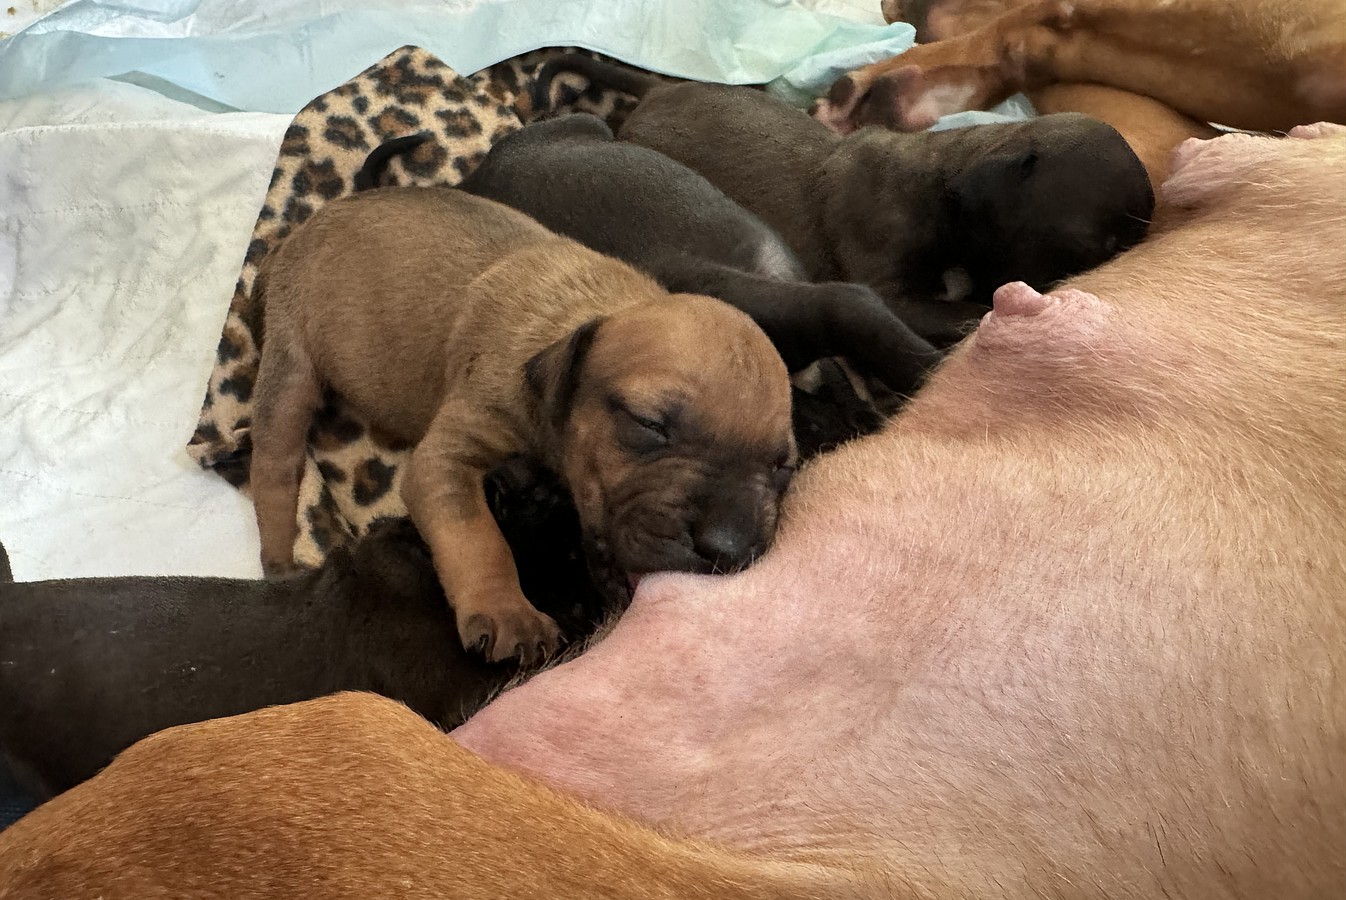 Janet Jackson, rescued by the Humane Society of the United States from a massive suspected dogfighting operation, recovers and cares for her puppies in a foster home. Janet Jackson and her puppies will eventually be available for adoption through Lucky Dog Animal Rescue.